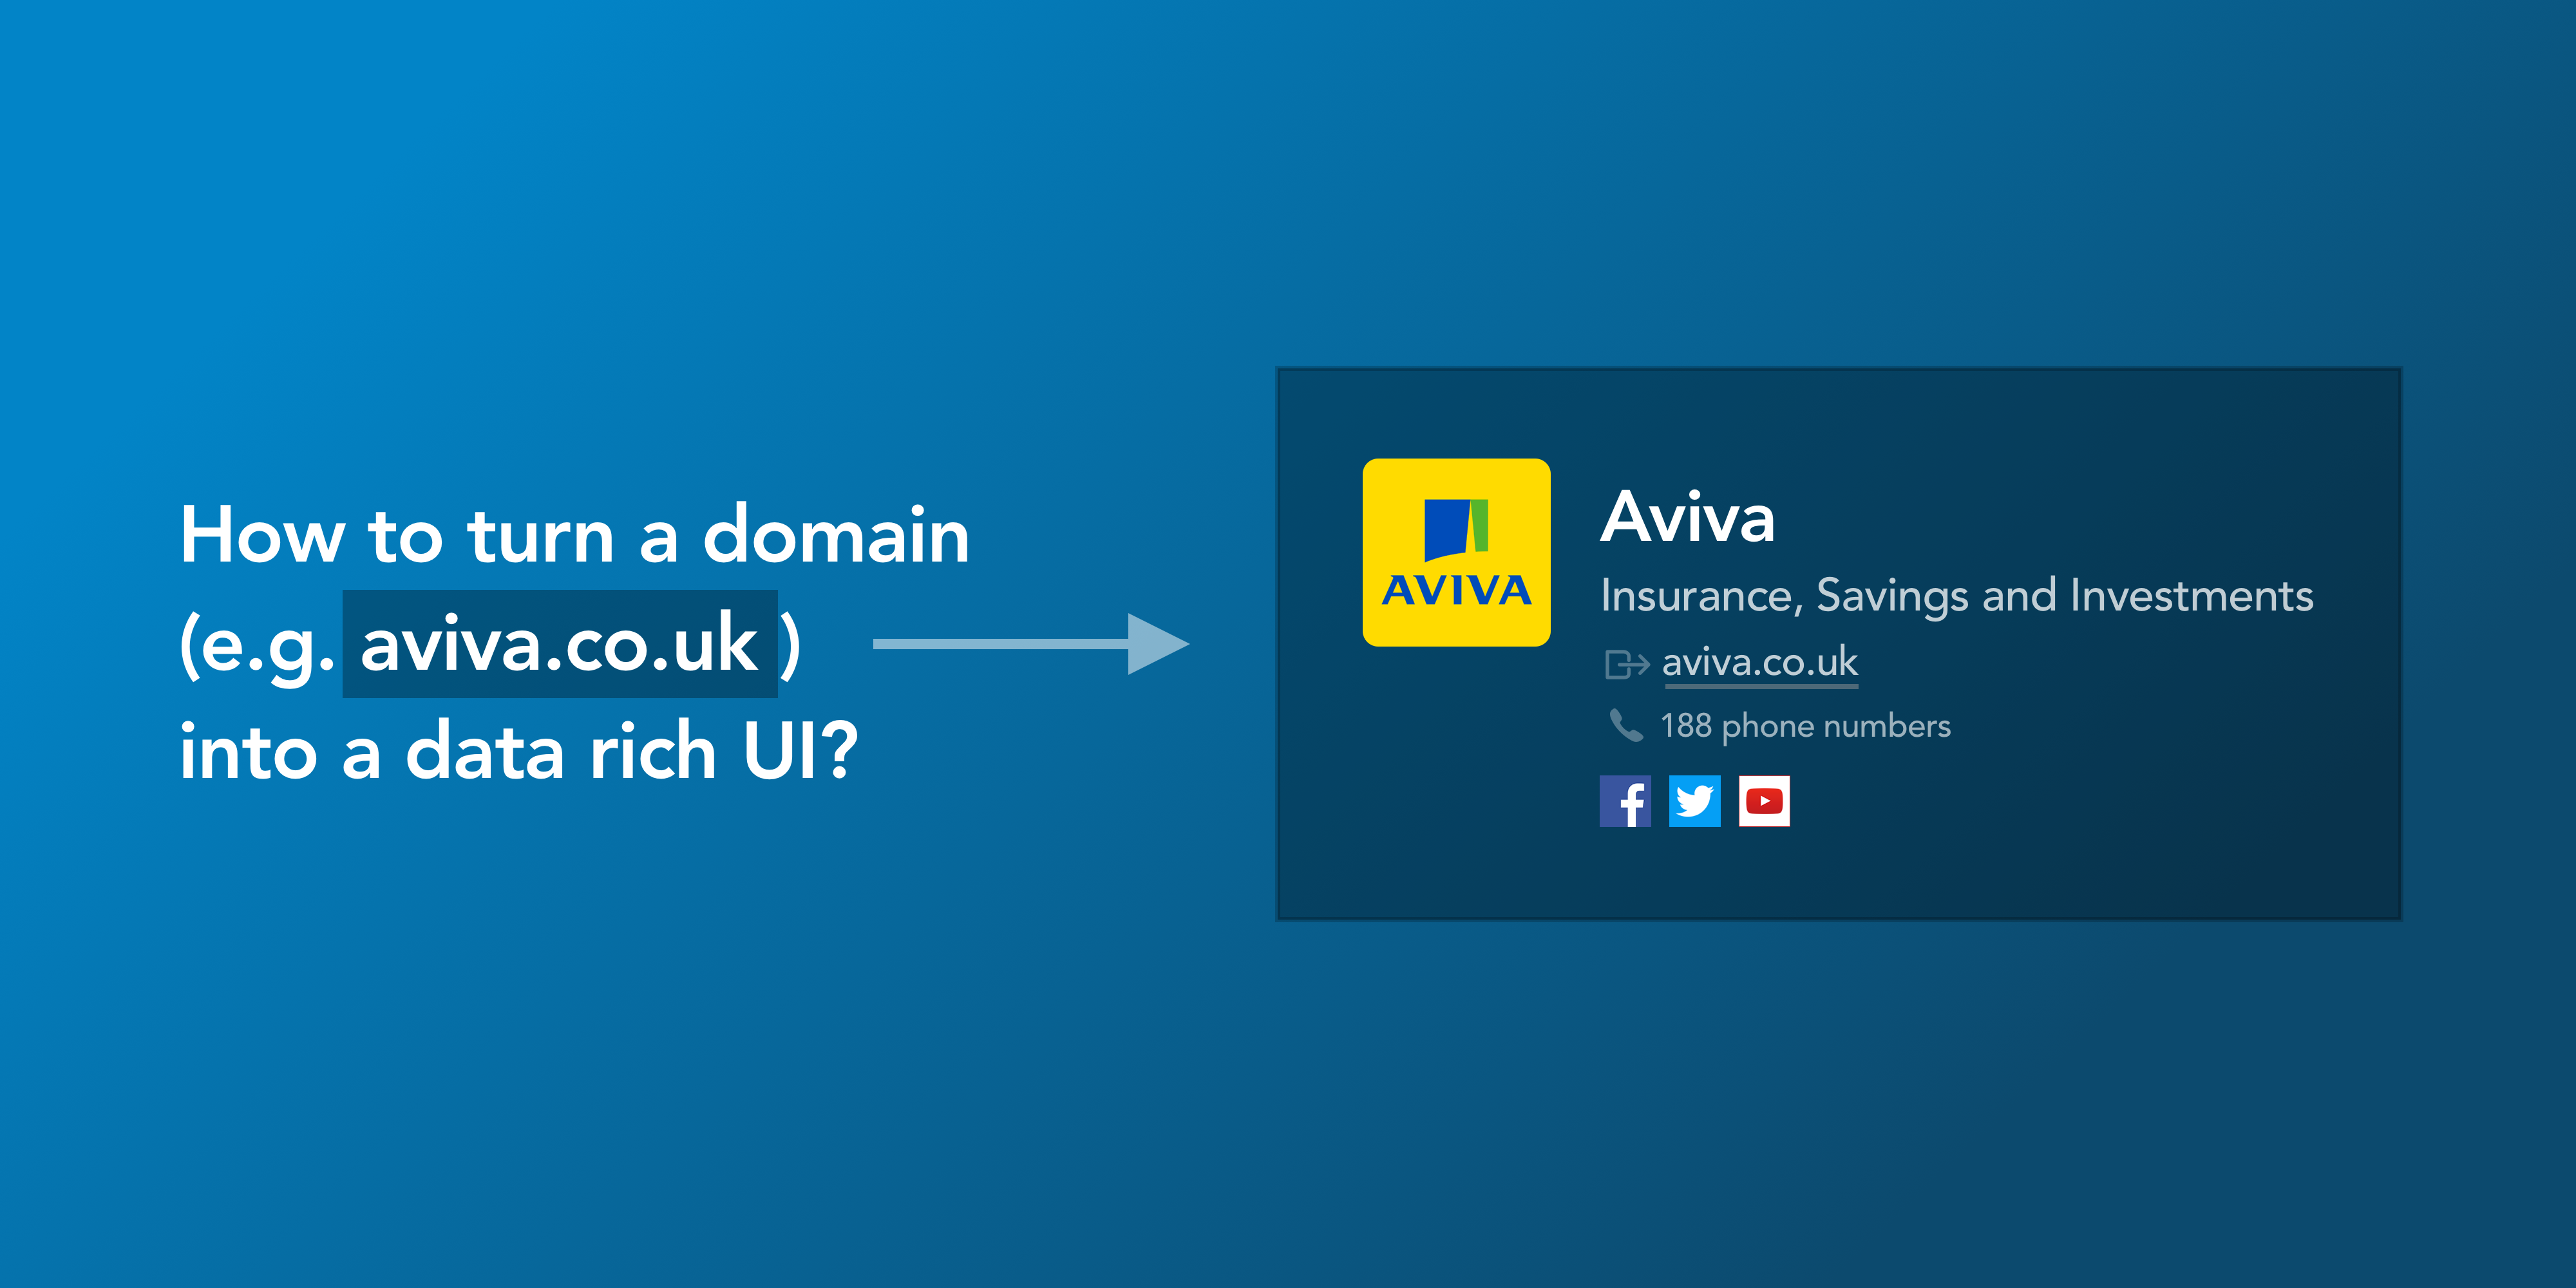 How to turn a domain (e.g. aviva.co.uk) into a data rich UI?